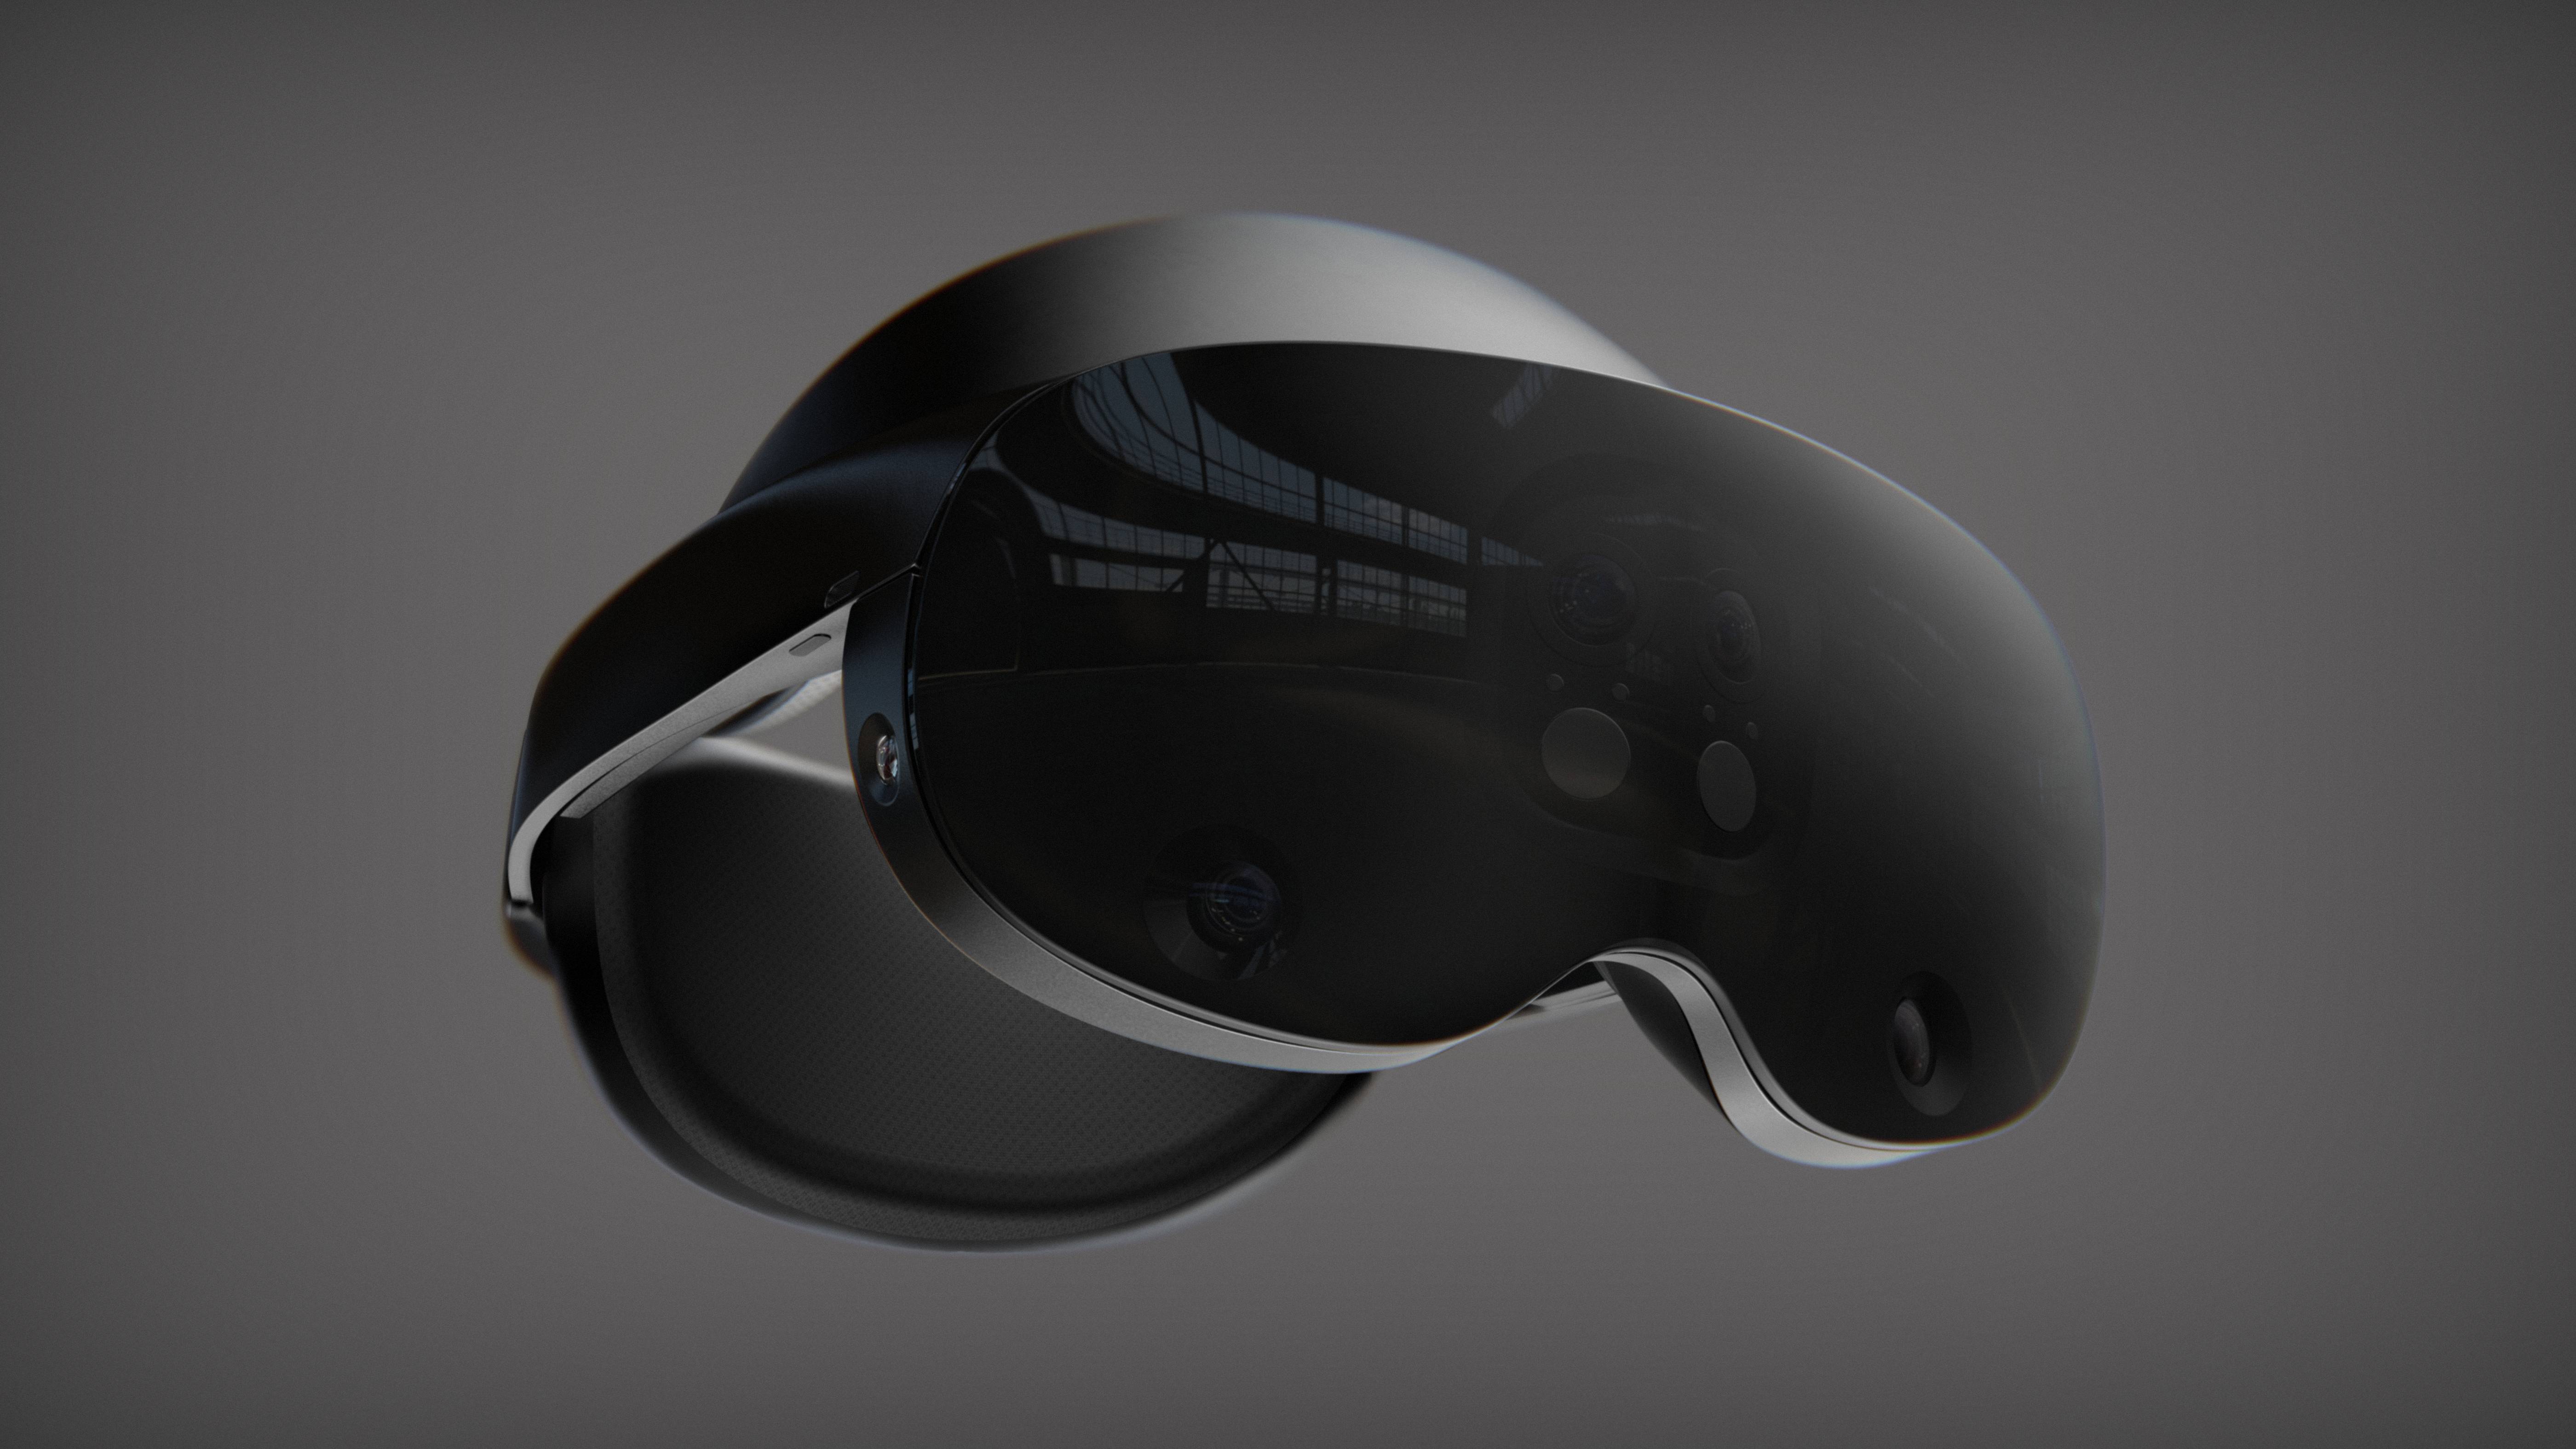 Quest Pro: Meta's new VR headset coming in October, Quest 2 success "in the ballpark" of Xbox and Playstation